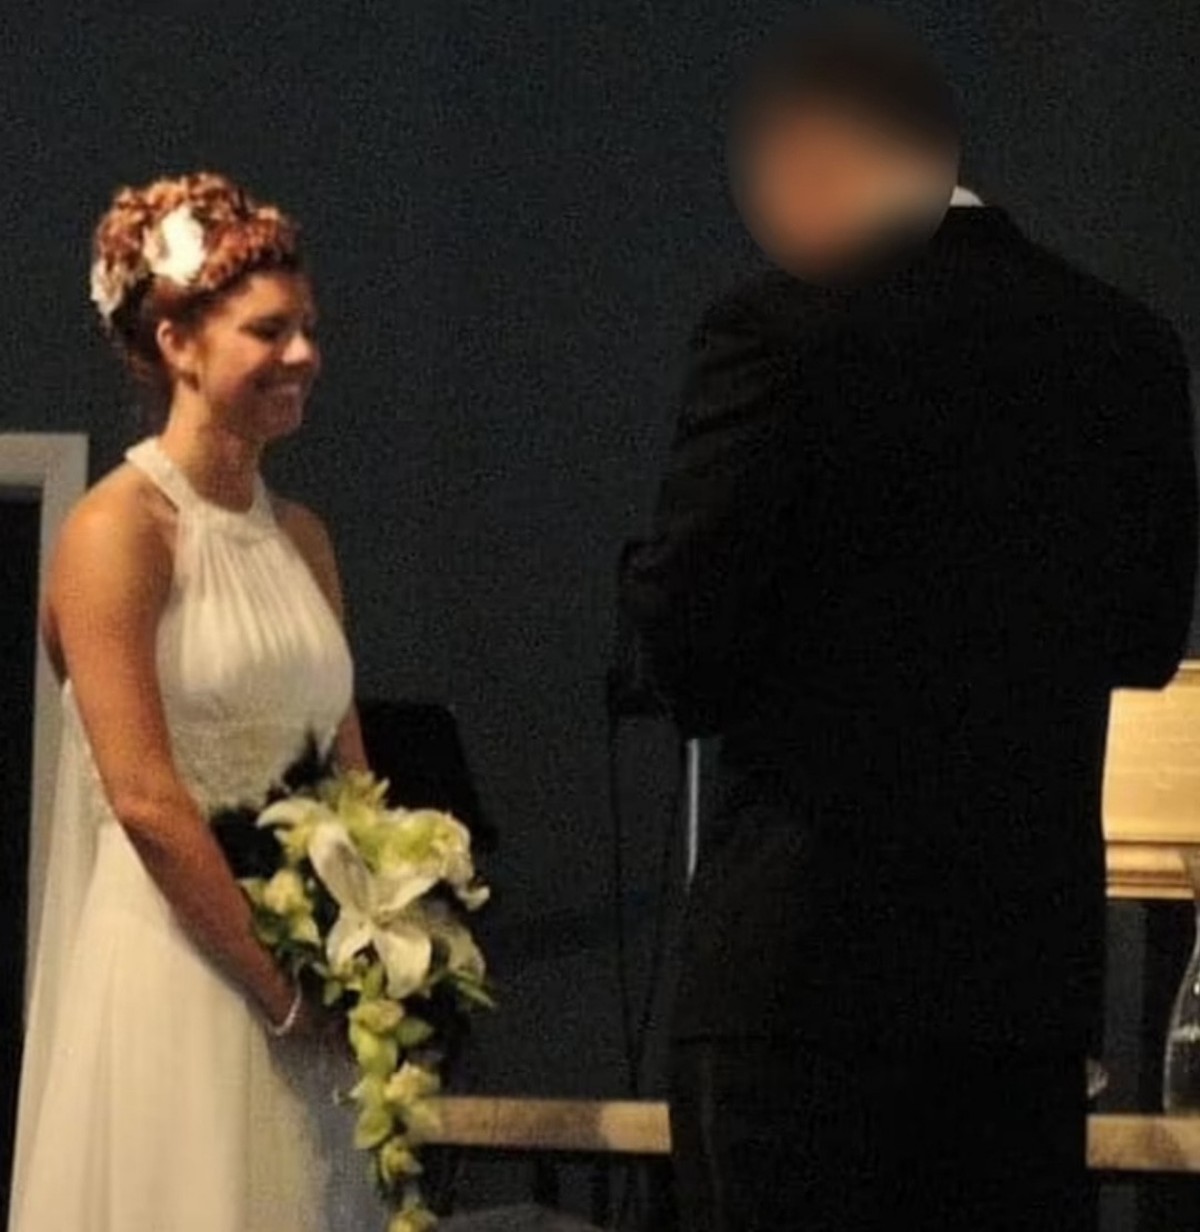 Bride Marries Best Man After He Confesses His Love For Her At Her Wedding Reception.